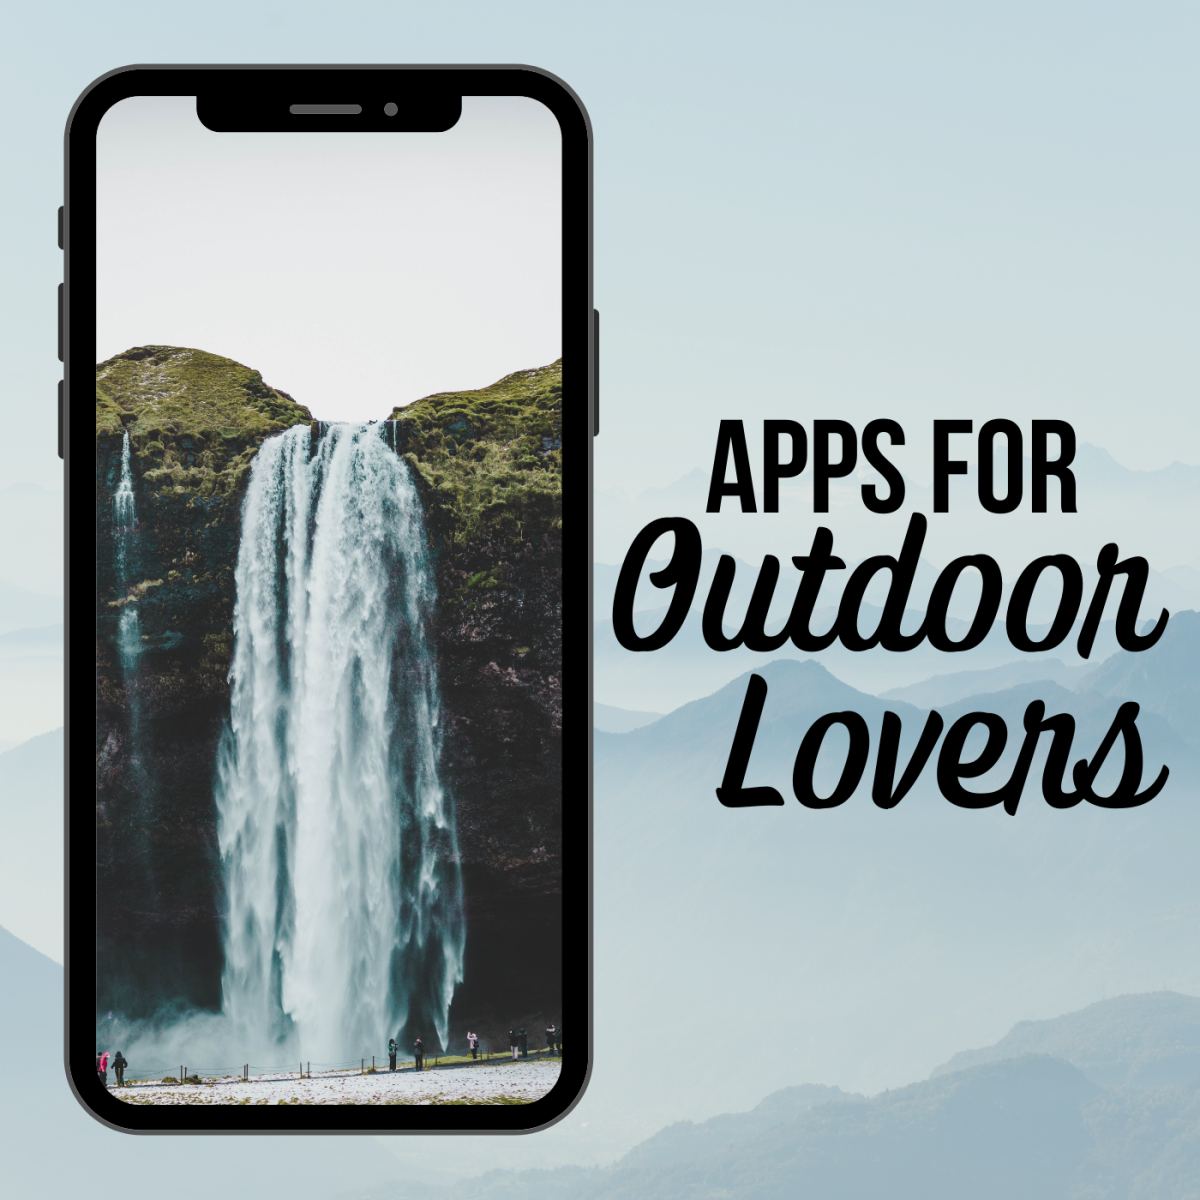 50 Smartphone Apps for Outdoor Lovers